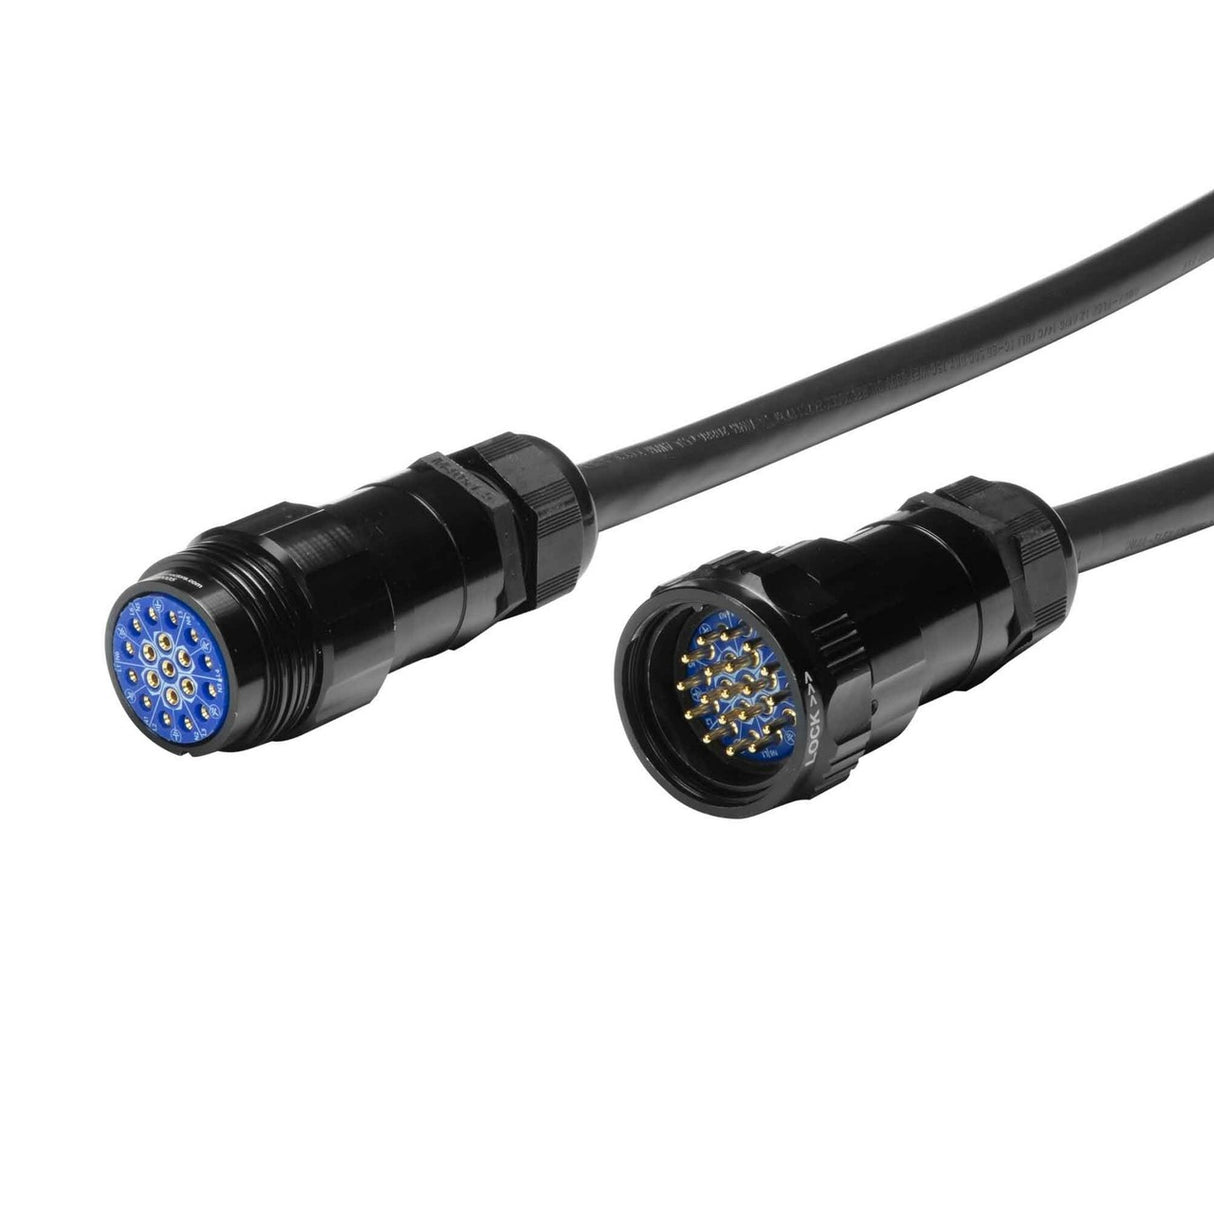 Elite Core 19 Pin Soco Extension Male to Female Lighting Power Cable with Standard Connector, 150 Foot